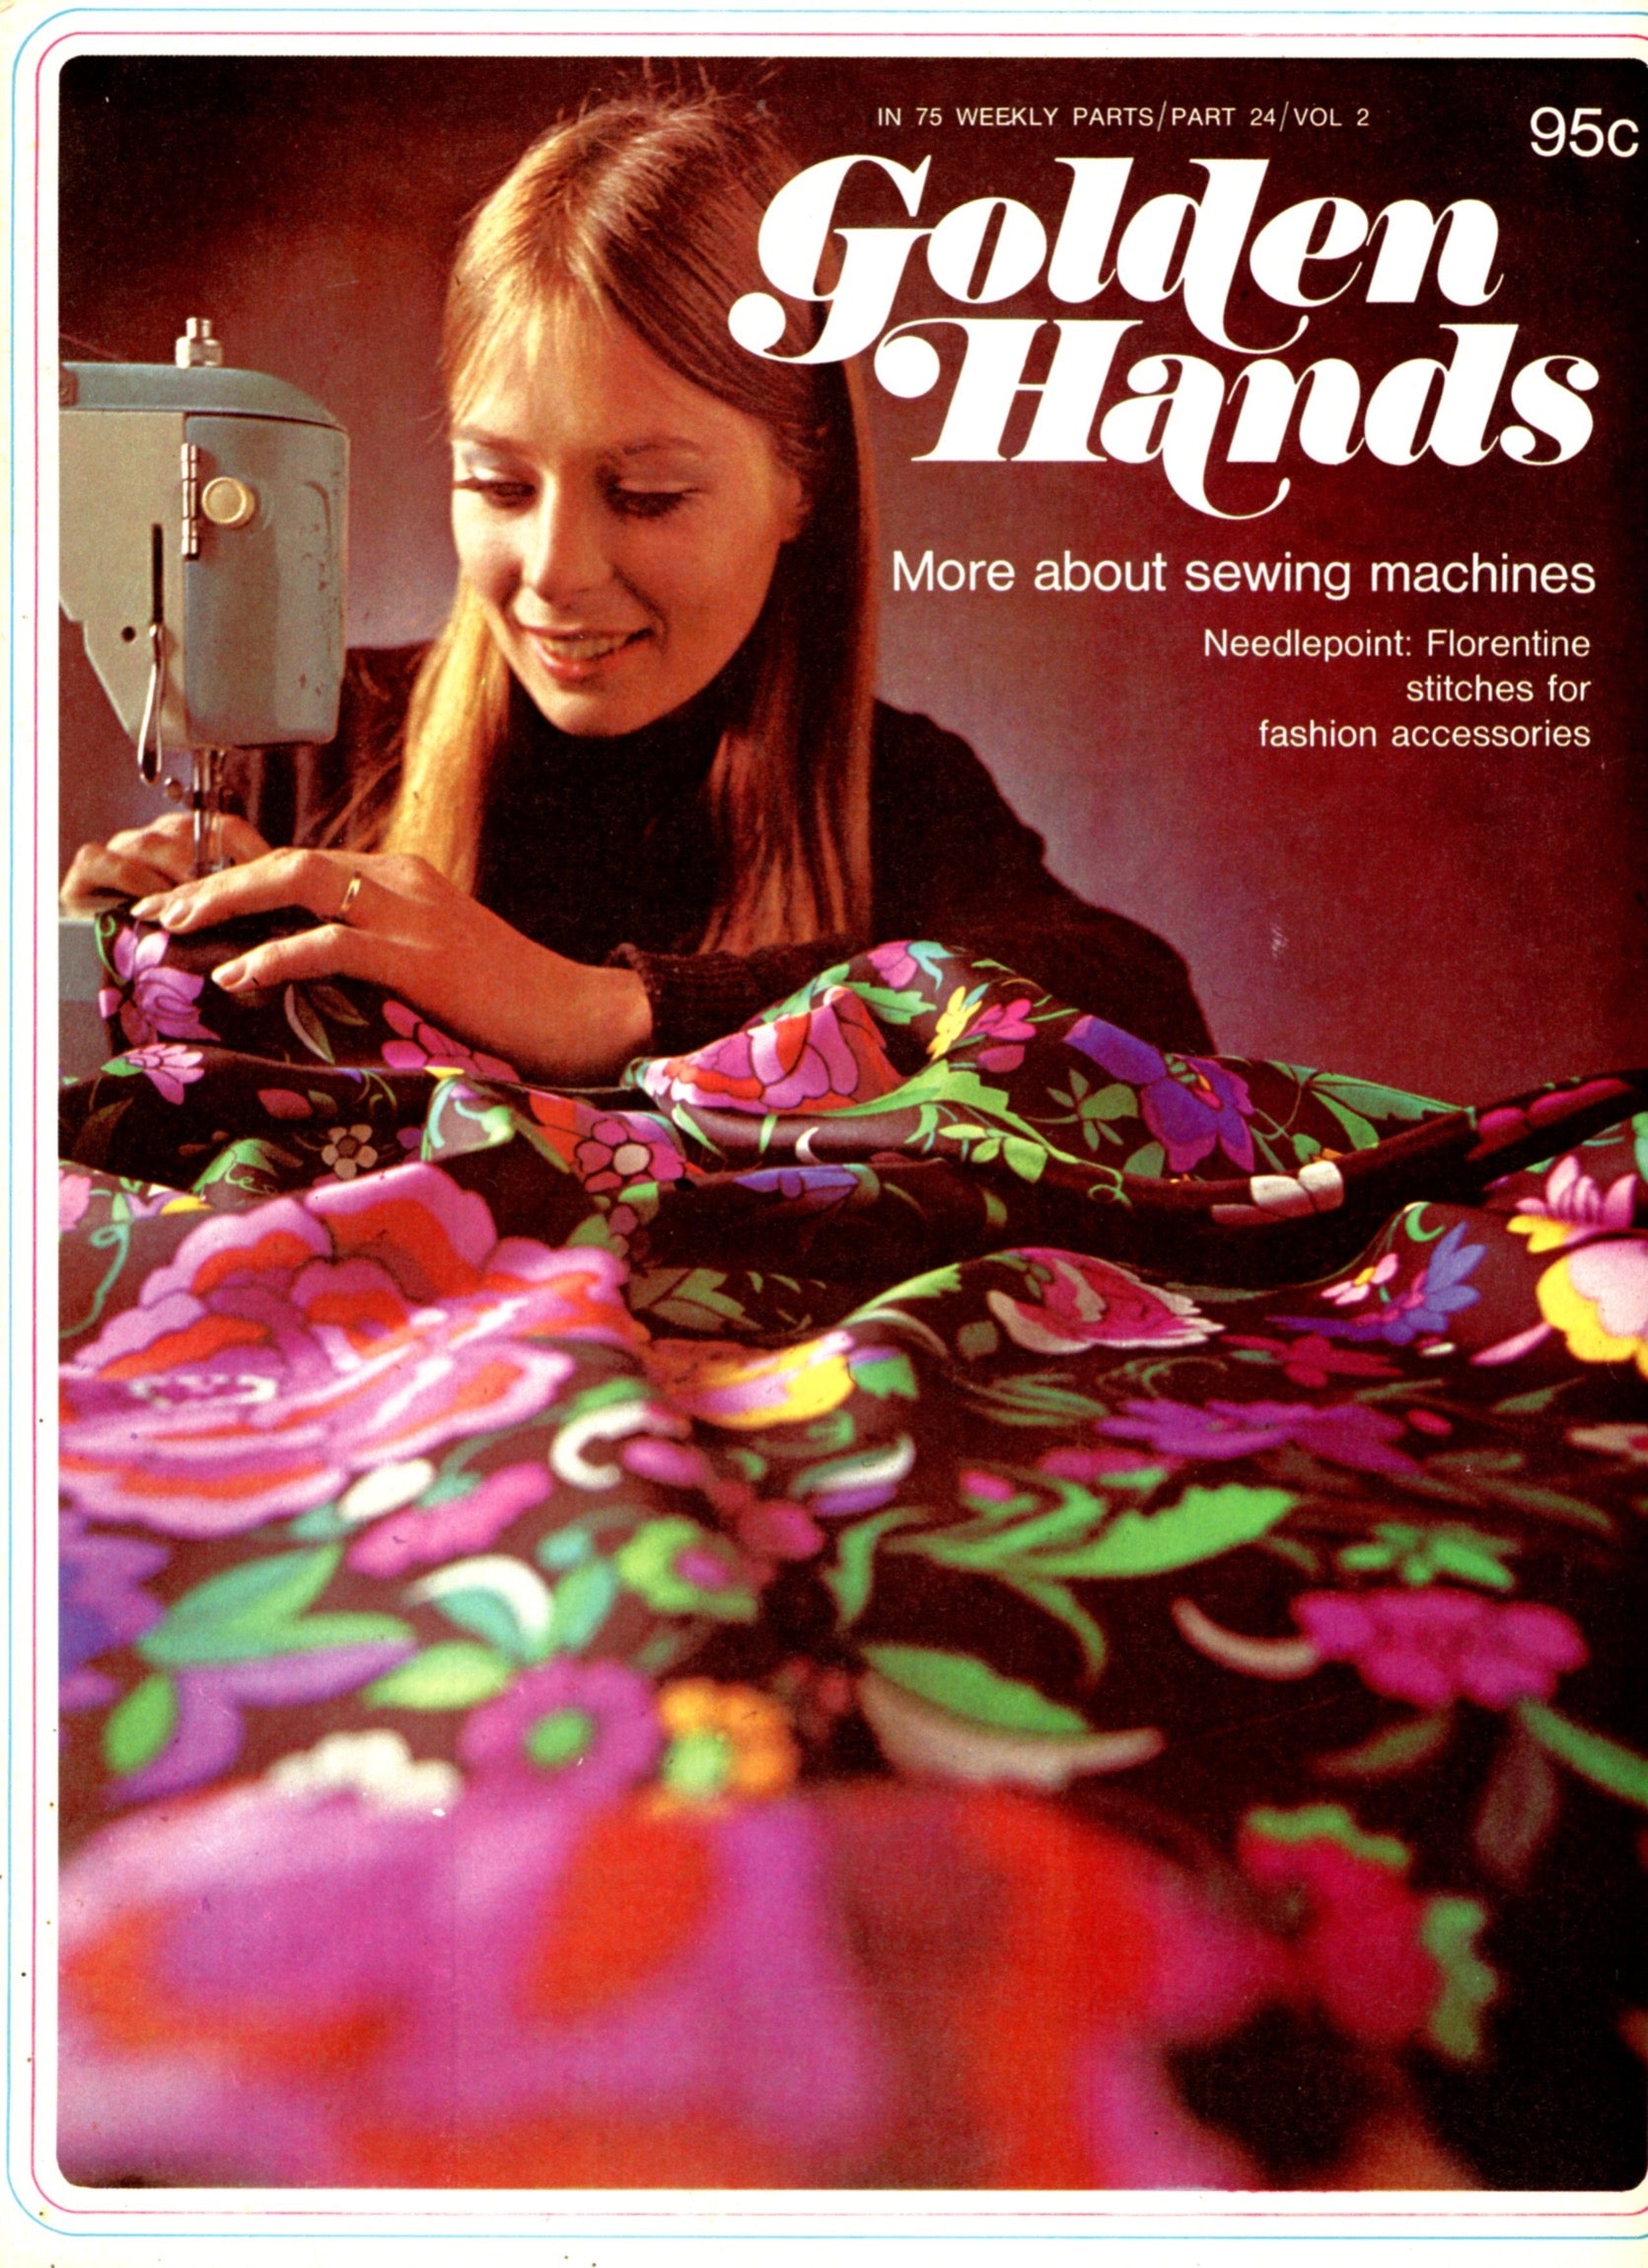 GOLDEN HANDS by Marshall Cavendish Ltd. London, England Copyright © 1971 Weekly Publication Volume 2 Parts 16 - 30 Sold Each